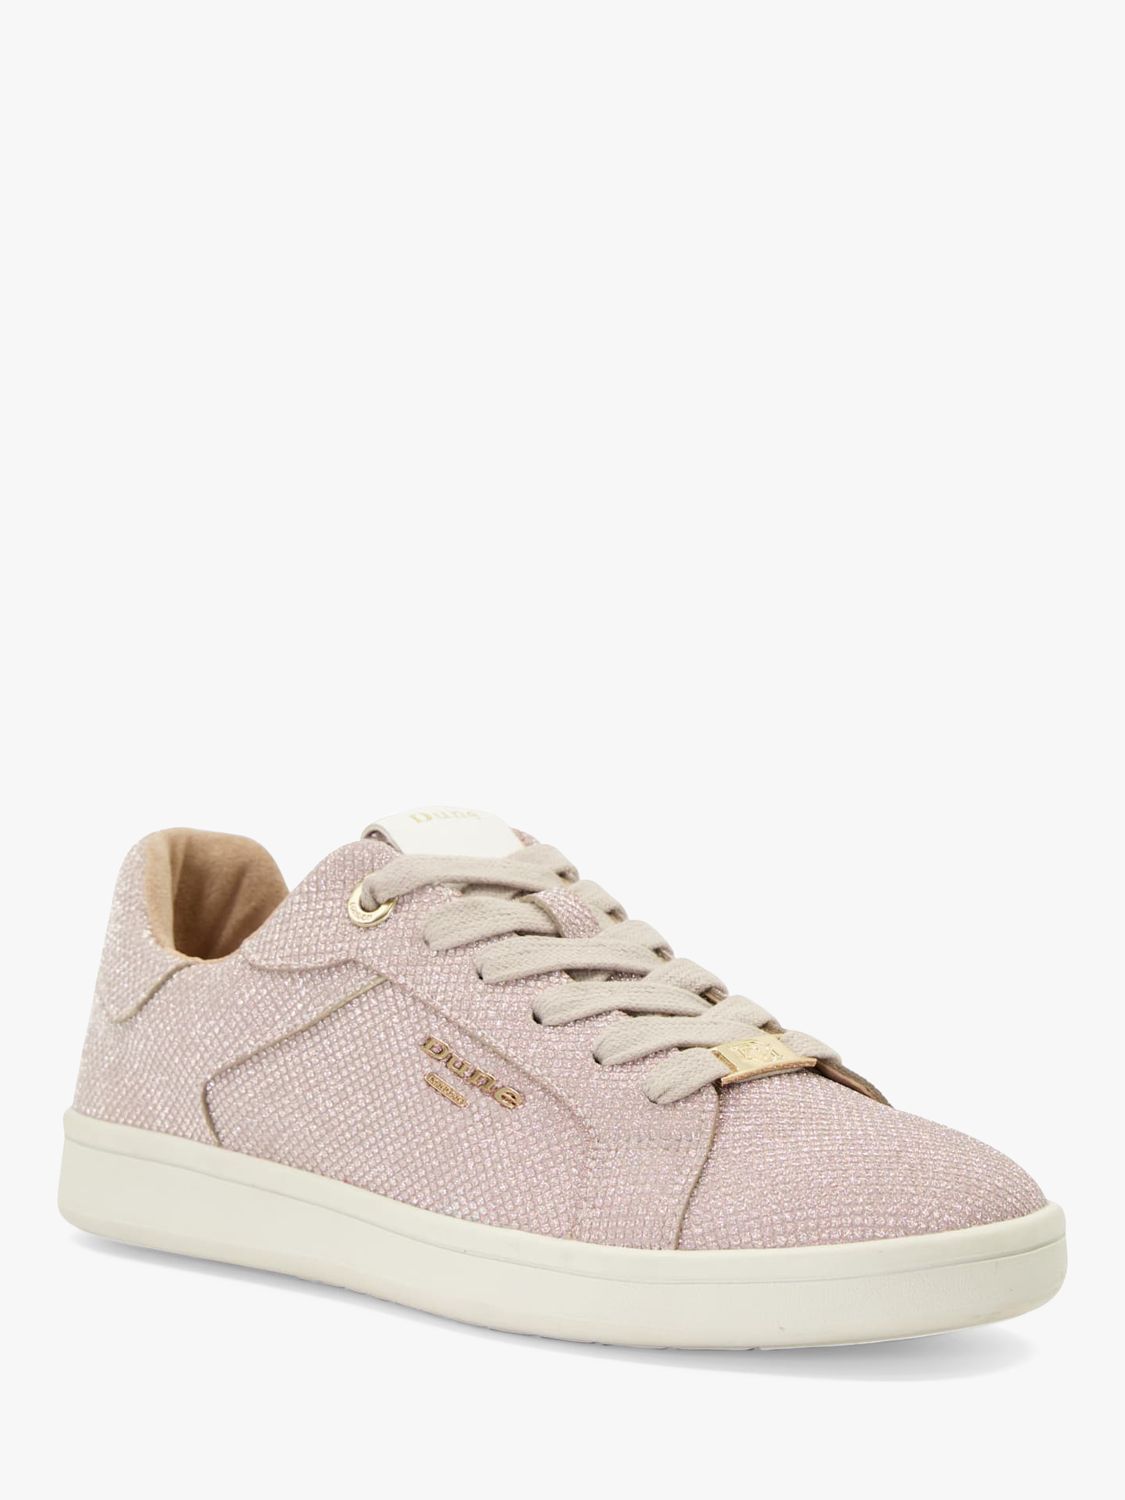 Buy Dune Enduring Trainers, Rose Gold Online at johnlewis.com